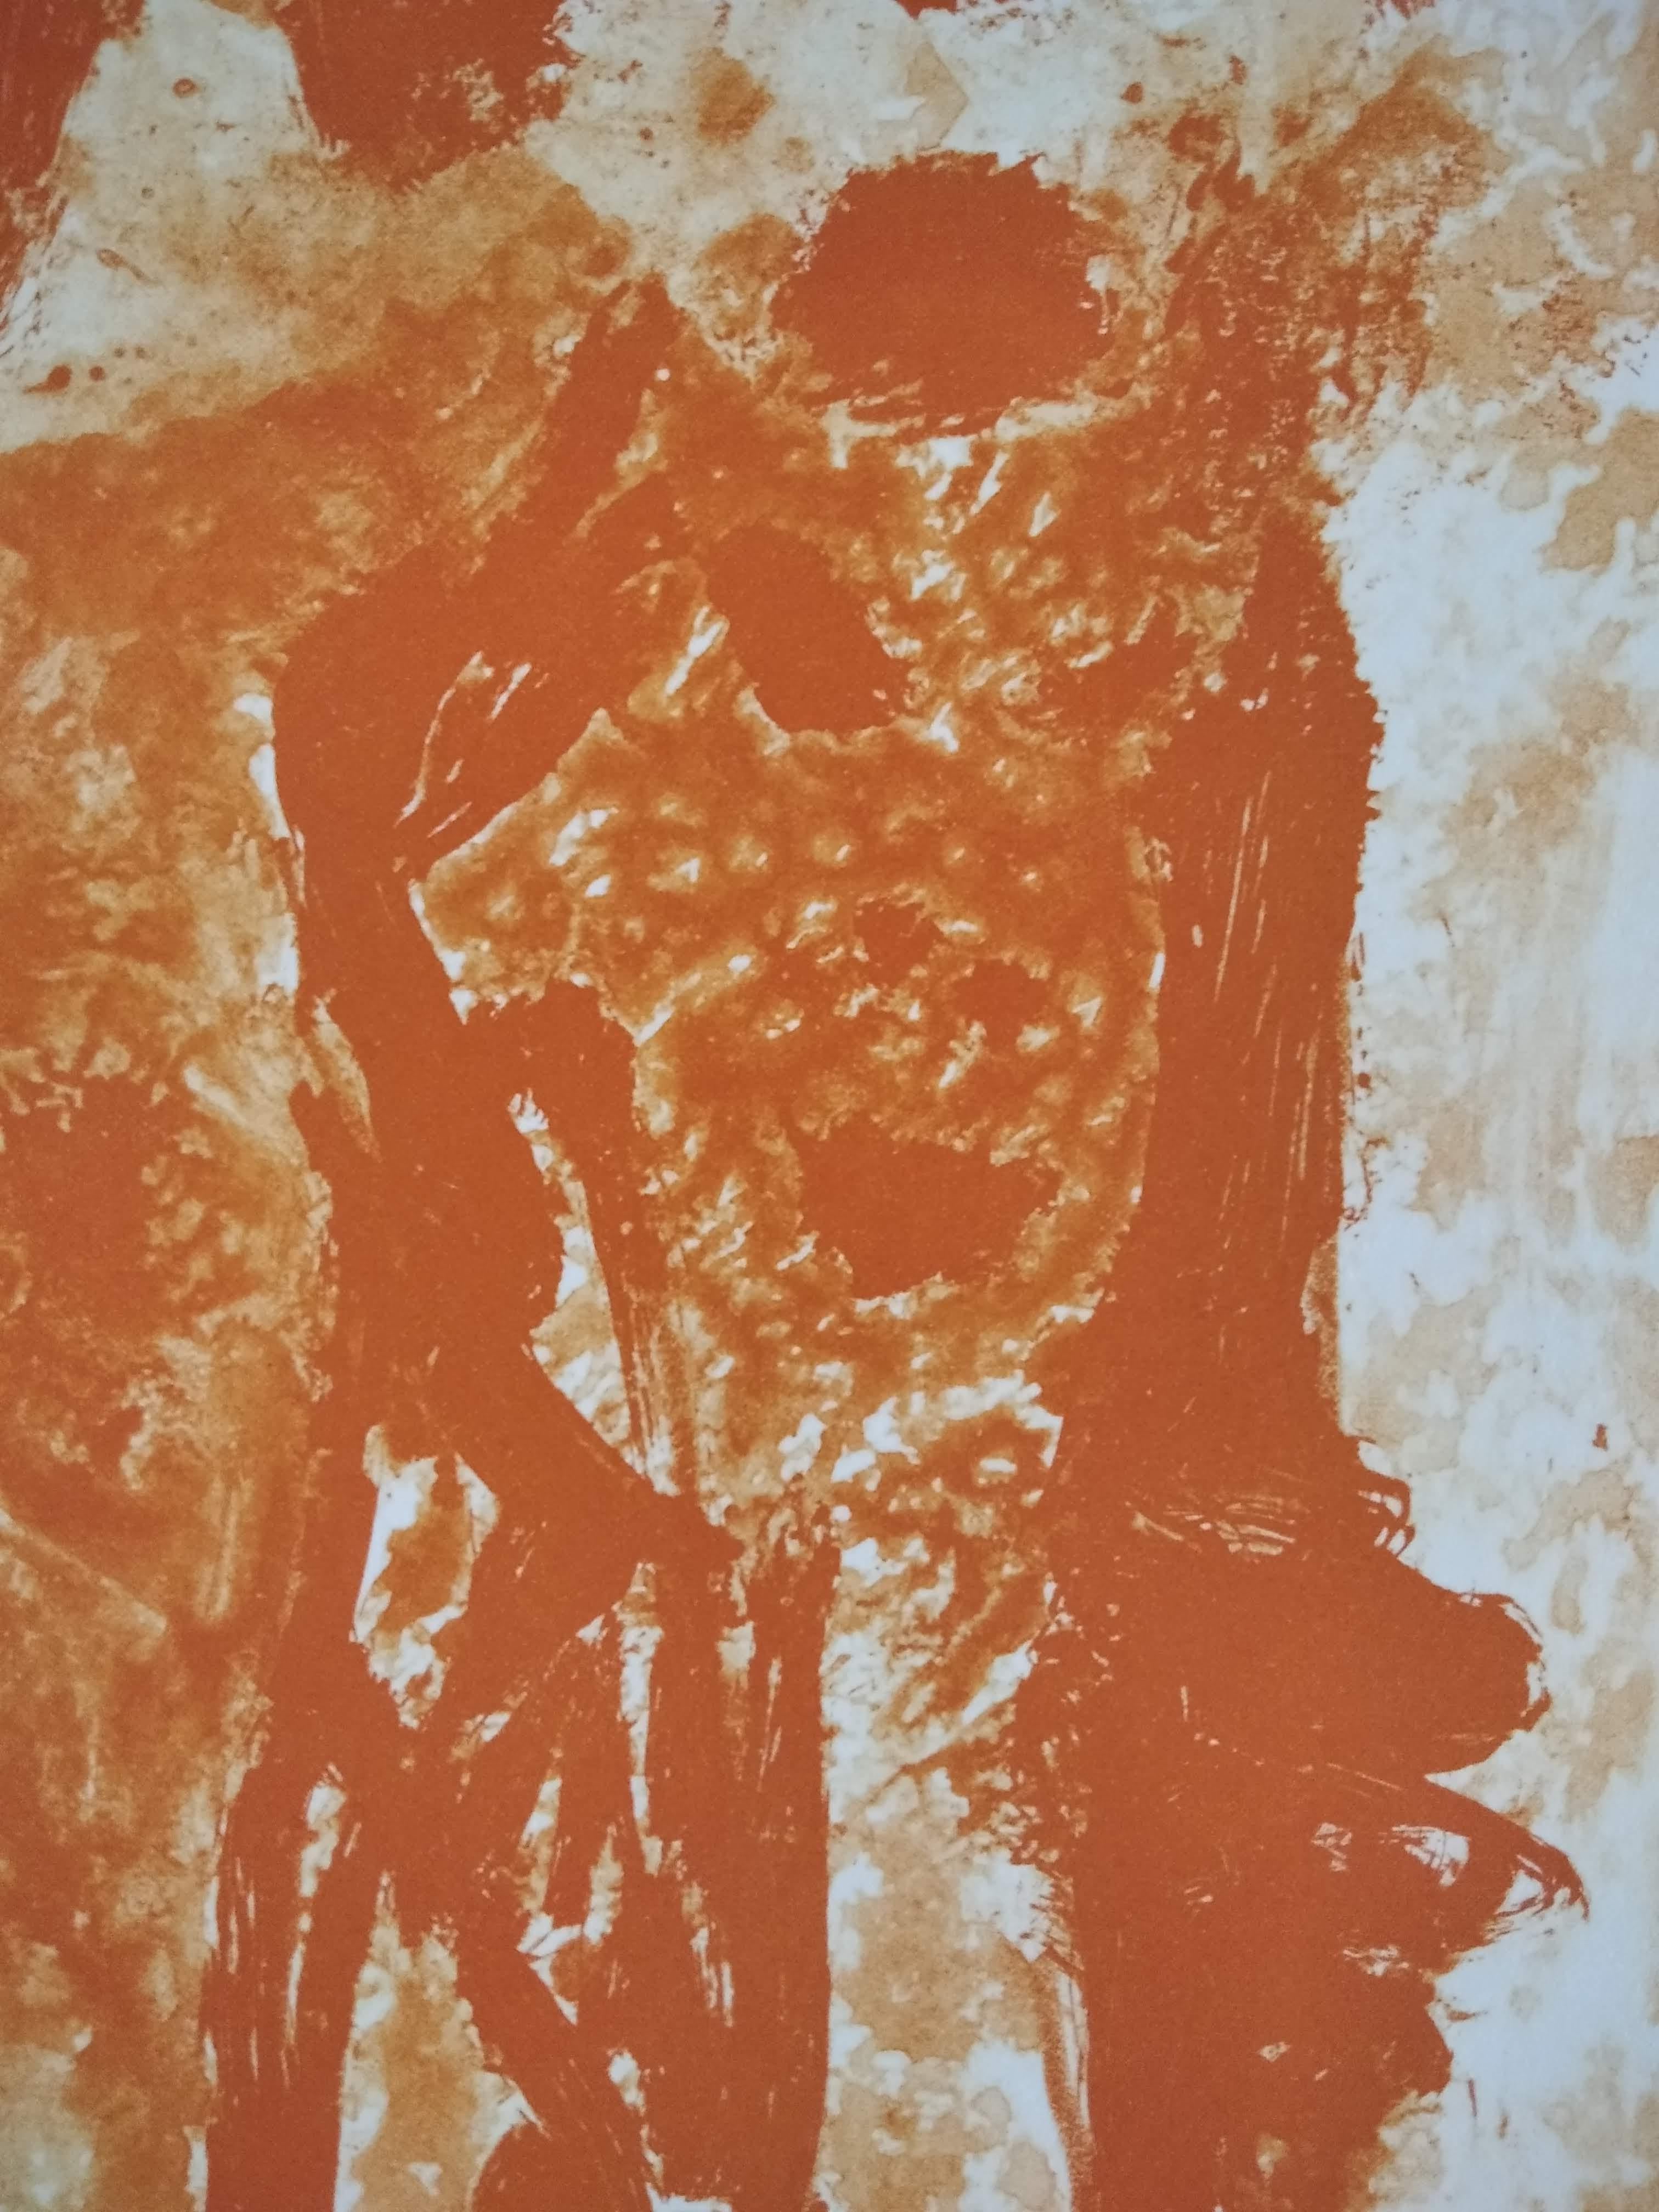 Untitled - Orange Abstract Painting by Luis Claramunt 